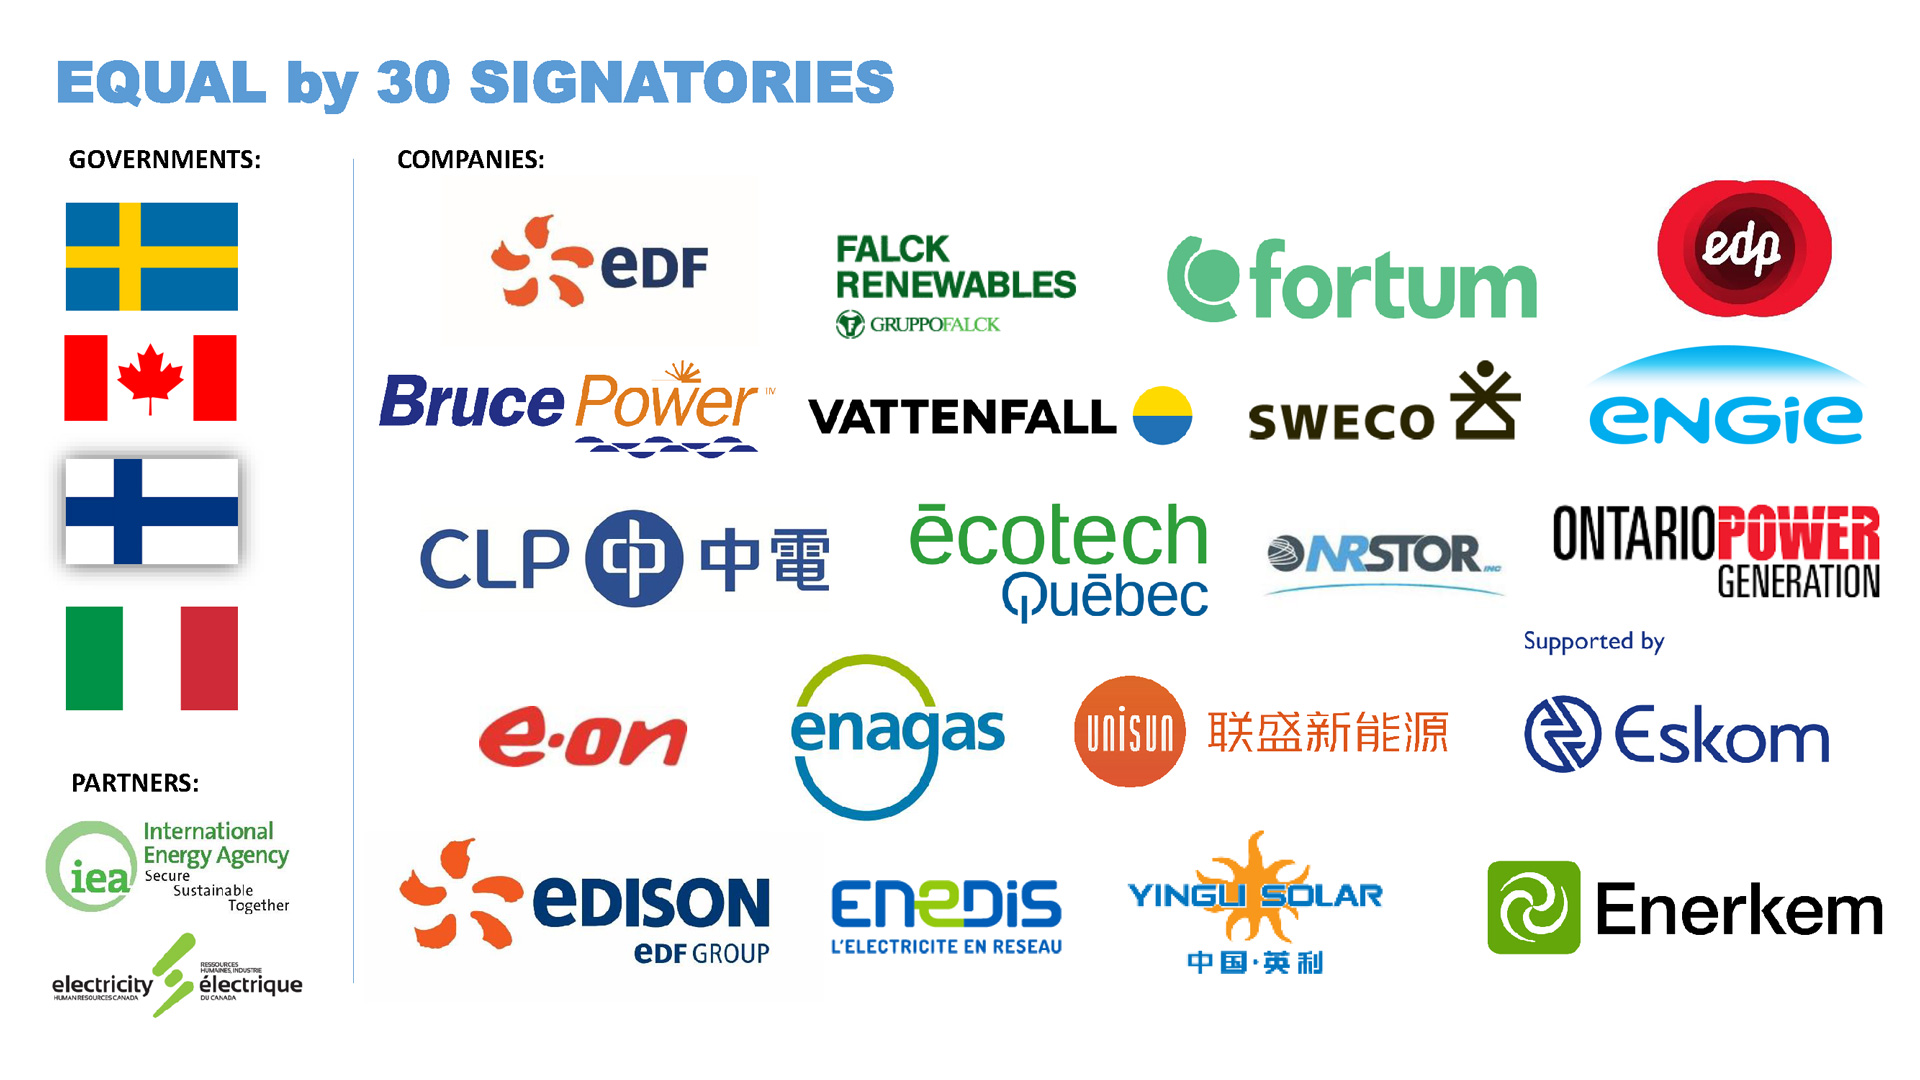 Twenty companies and four countries were among the signatories of Equal by 30, the International Energy Agency's (IEA) initiative to promote equality in the energy sector.